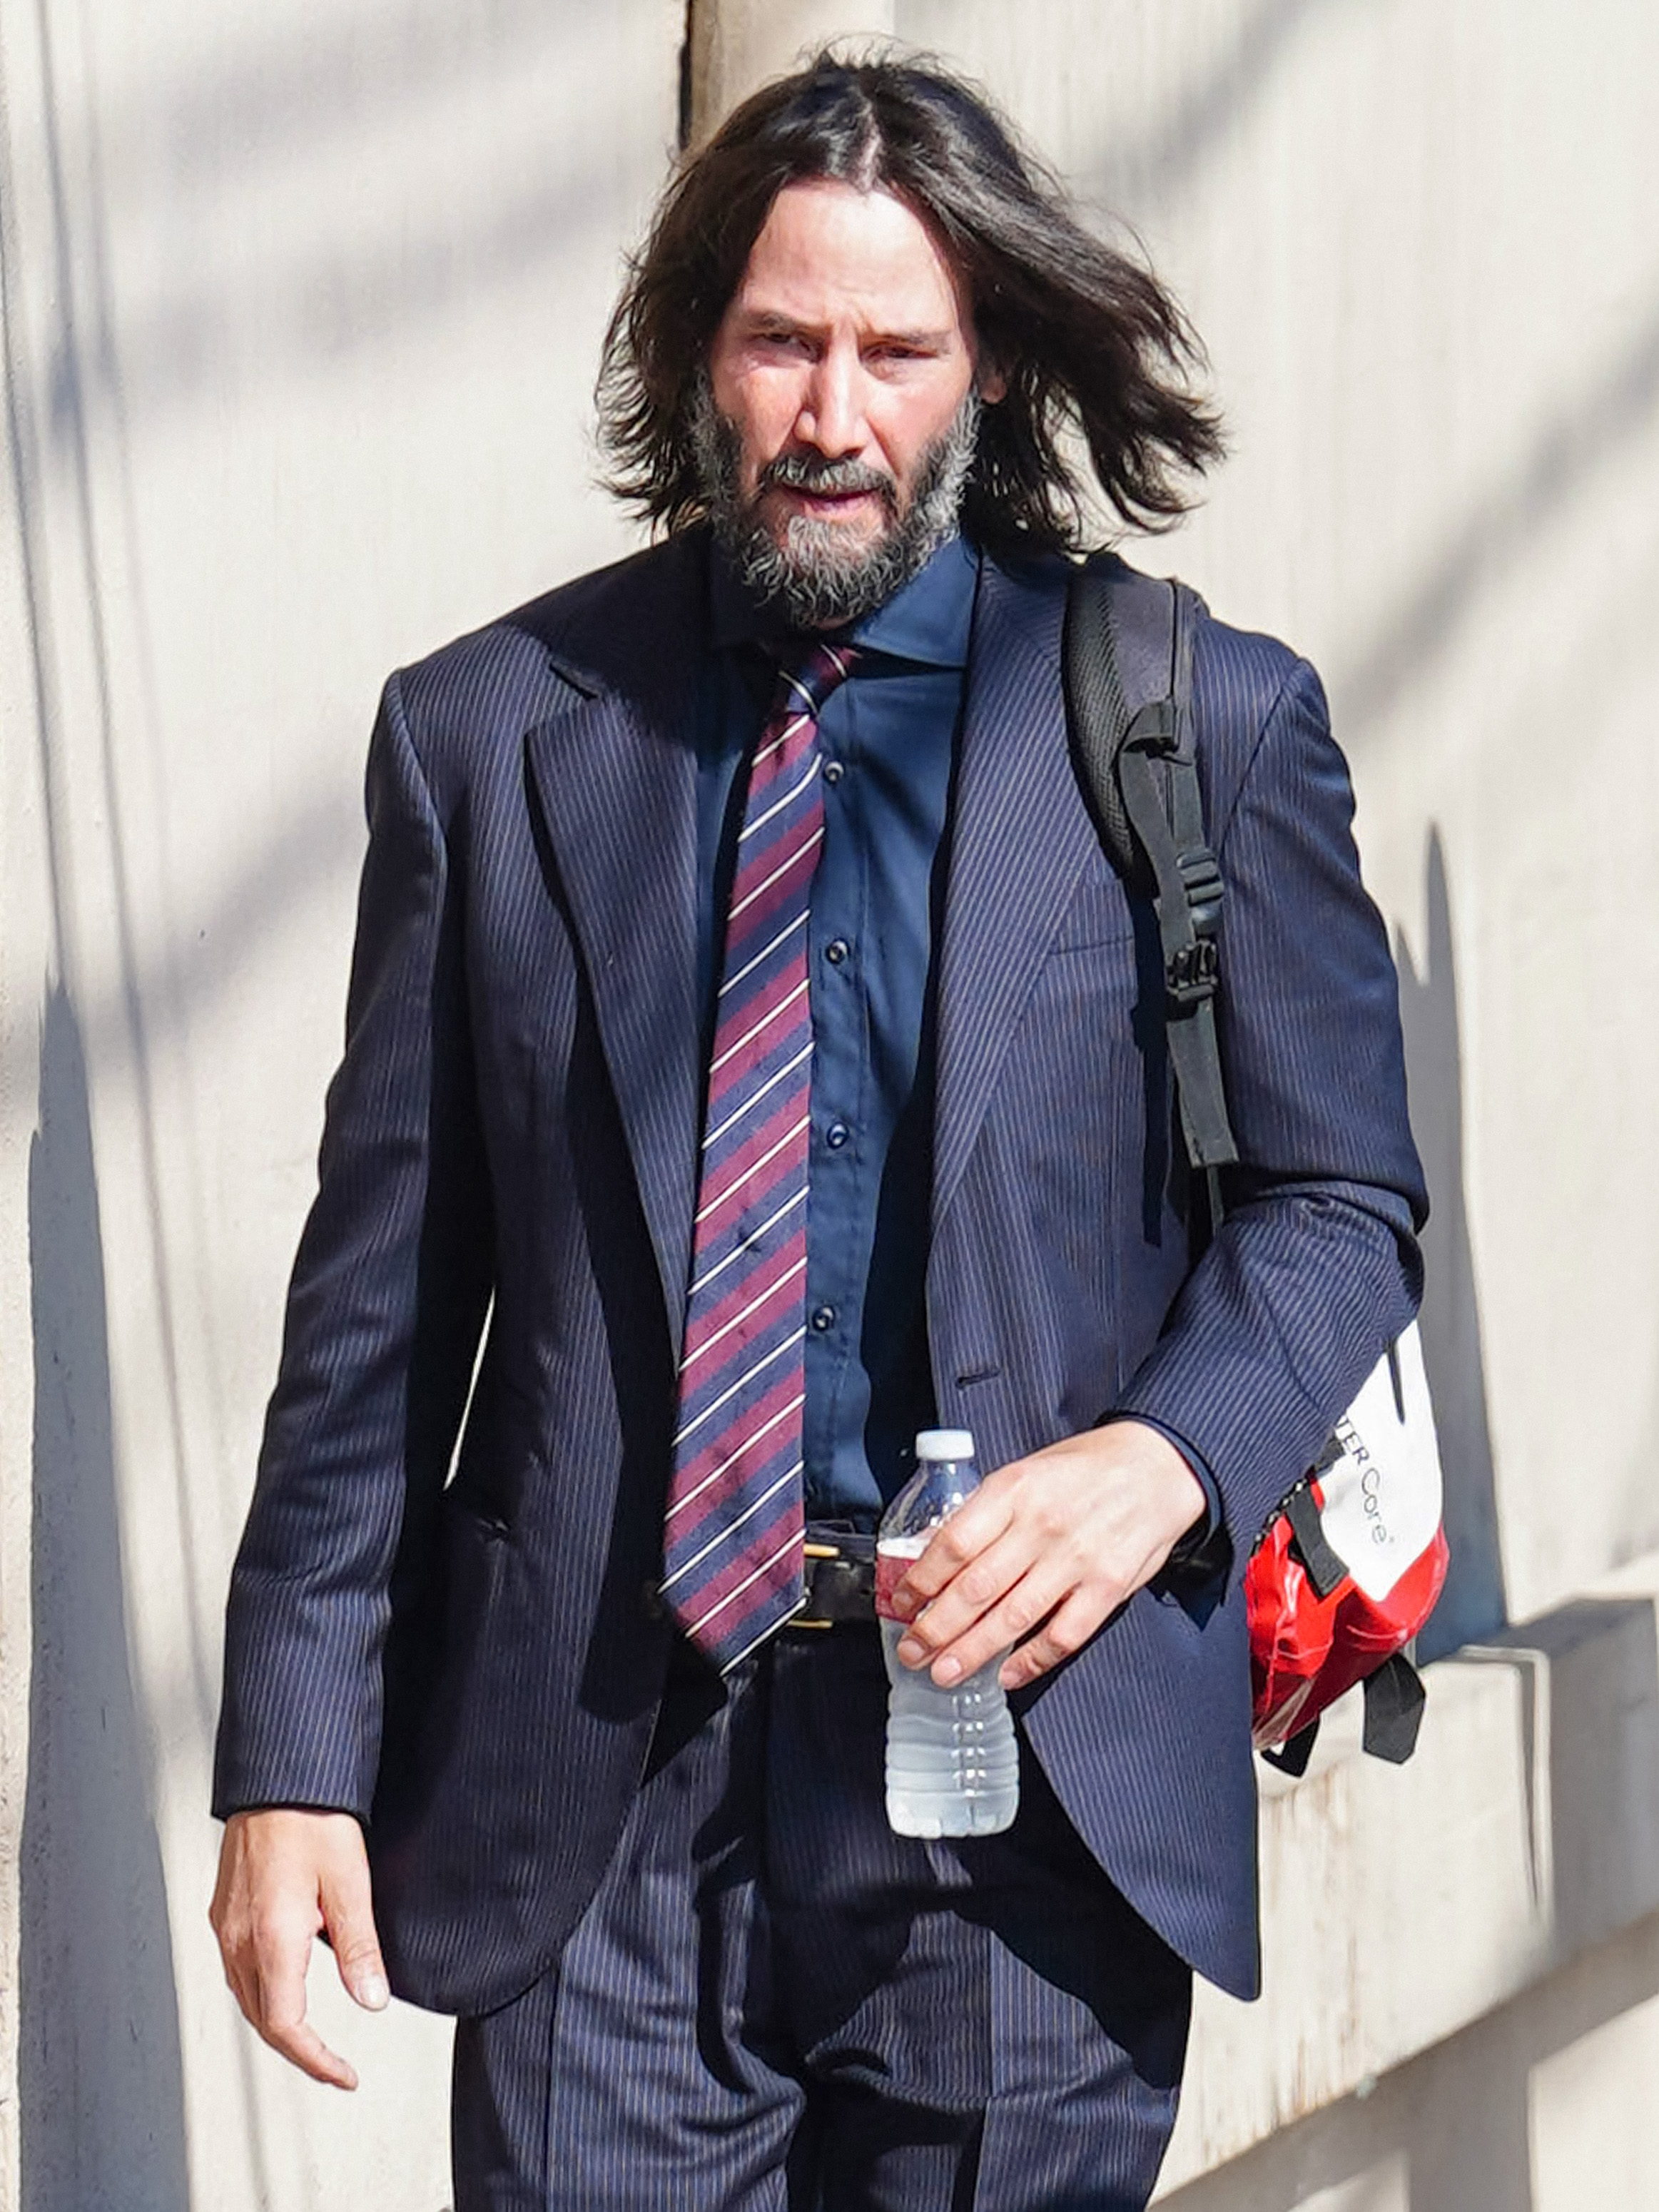 Keanu Reeves arriving "Jimmy Kimmel Live" Show on October 5, 2022 in Los Angeles, California | Source: Getty Images